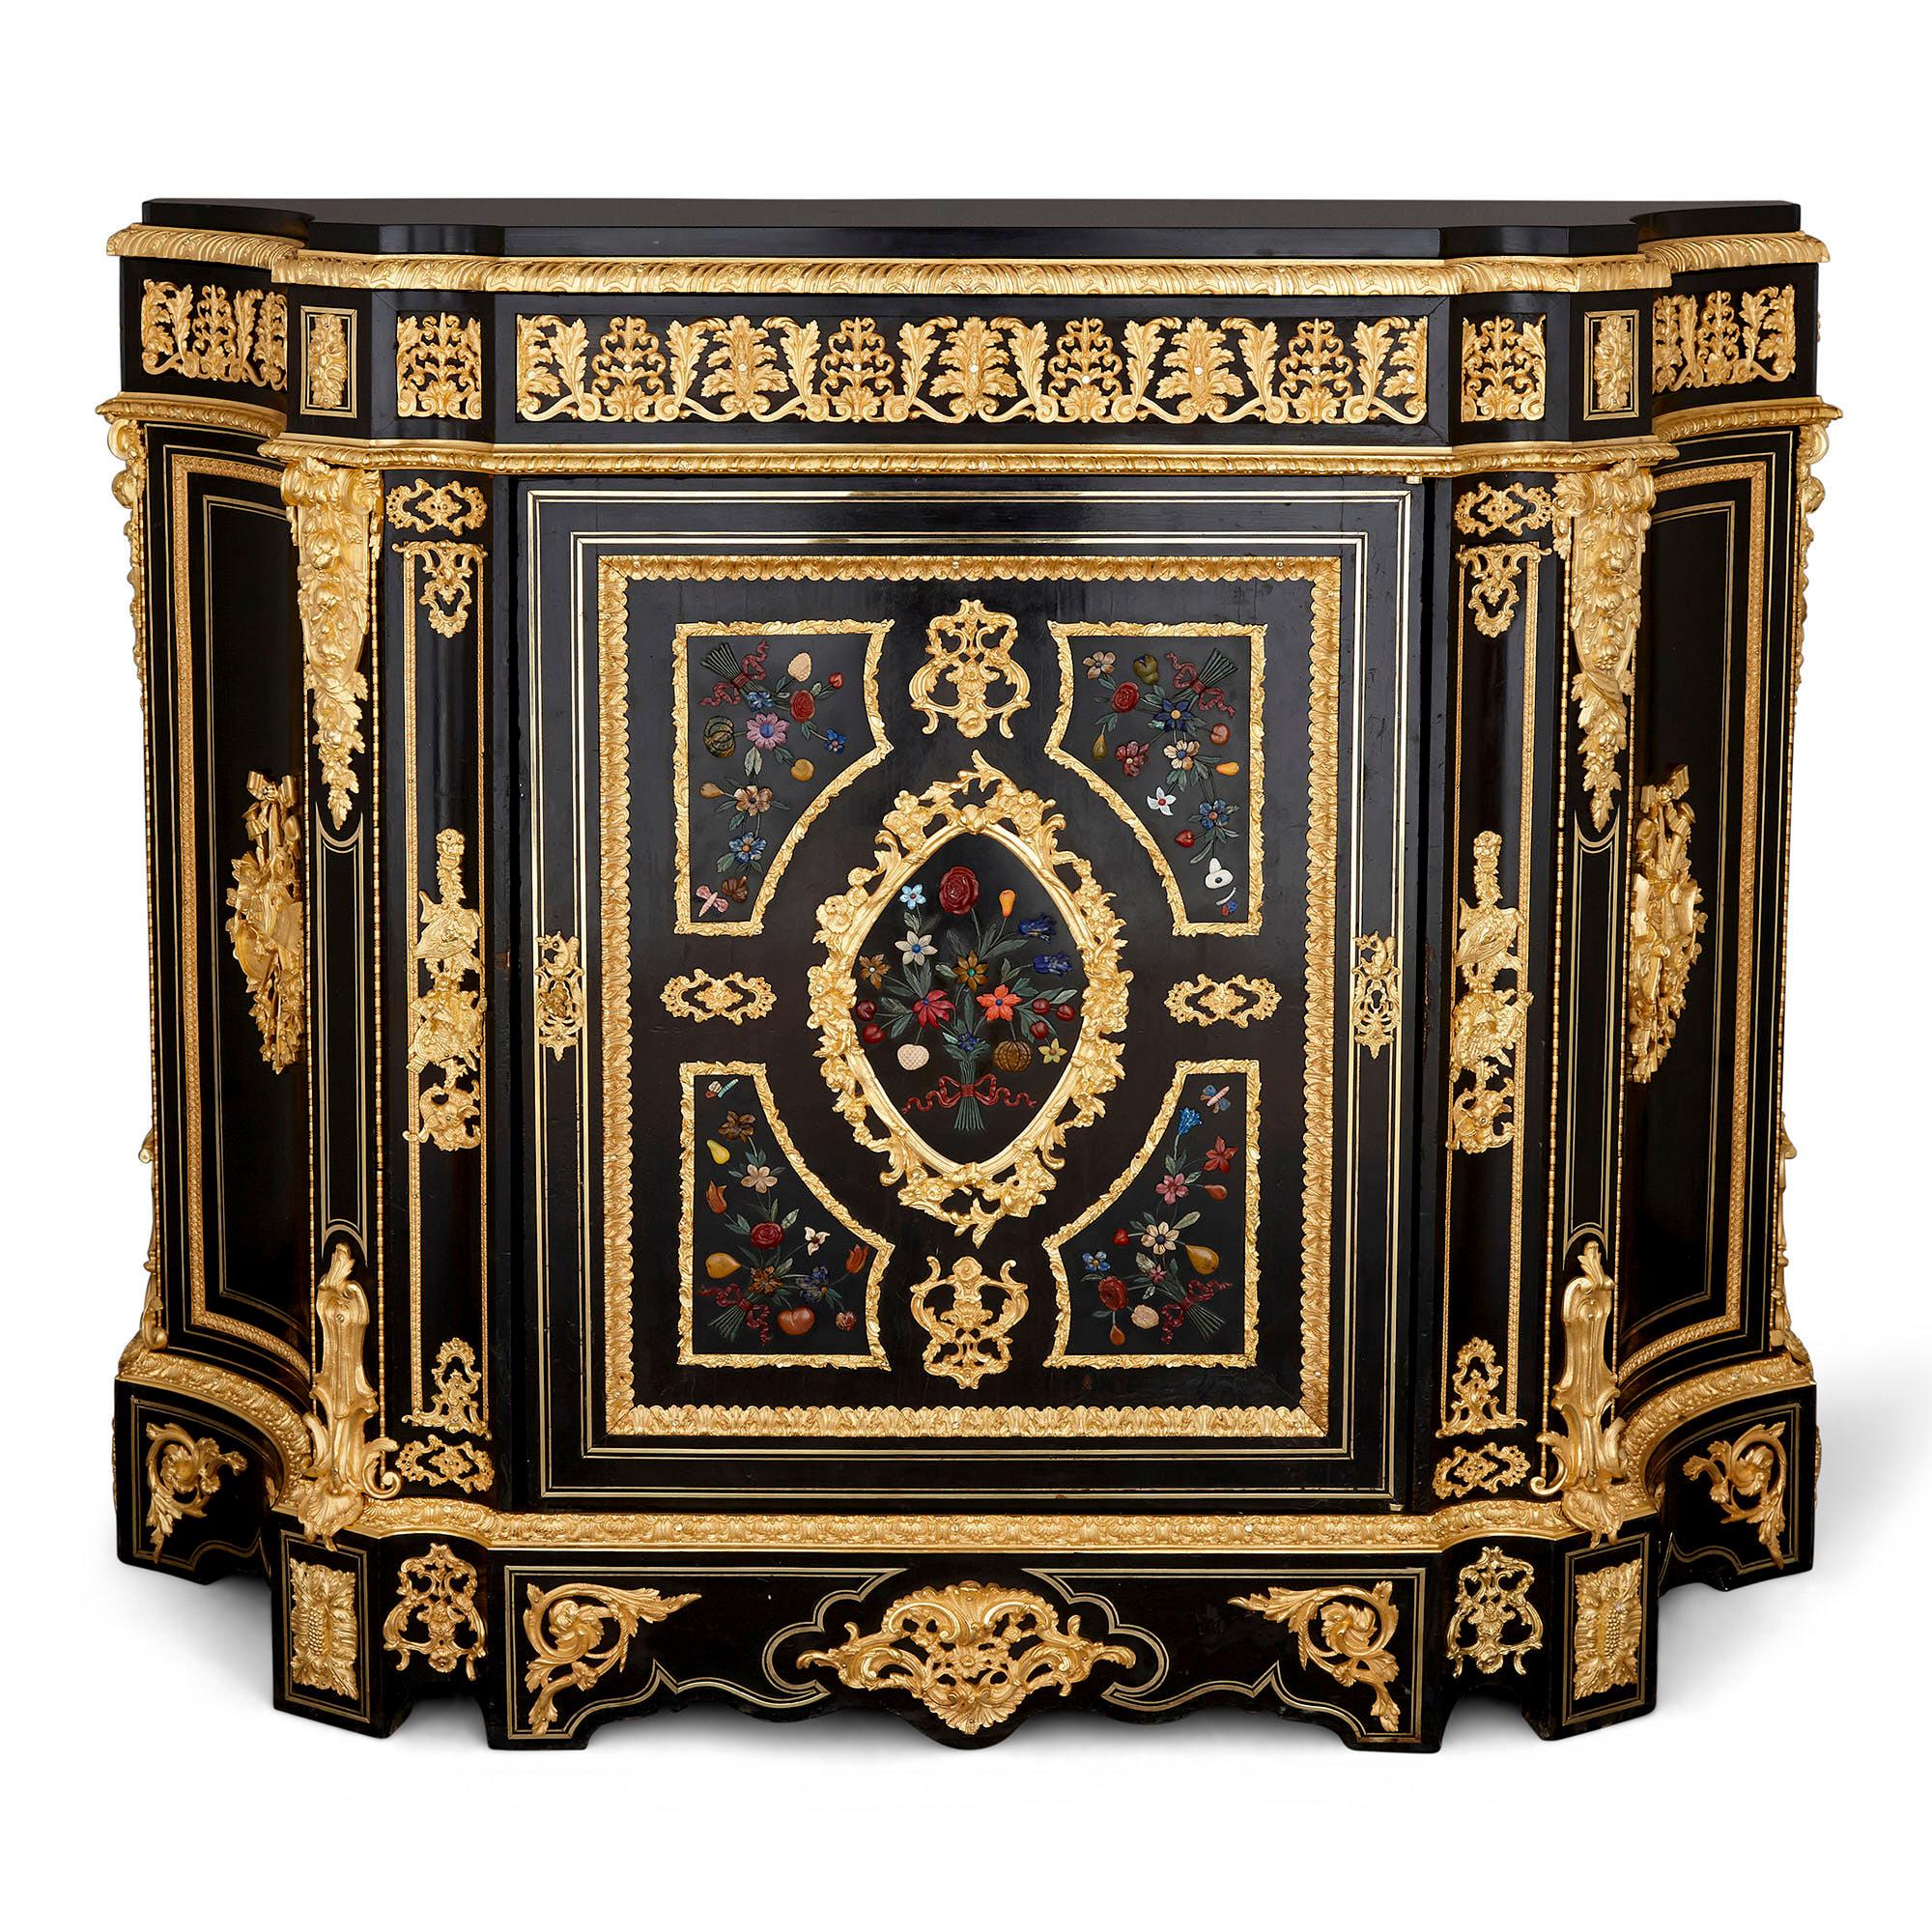 Two antique ebonized wood and ormolu cabinets with hardstone Pietra Dura inlay
French, late 19th century
Dimensions: Height 112cm, width 135cm, depth 43cm

This fine pair of cabinets are designed in an eclectic late 19th century French style,